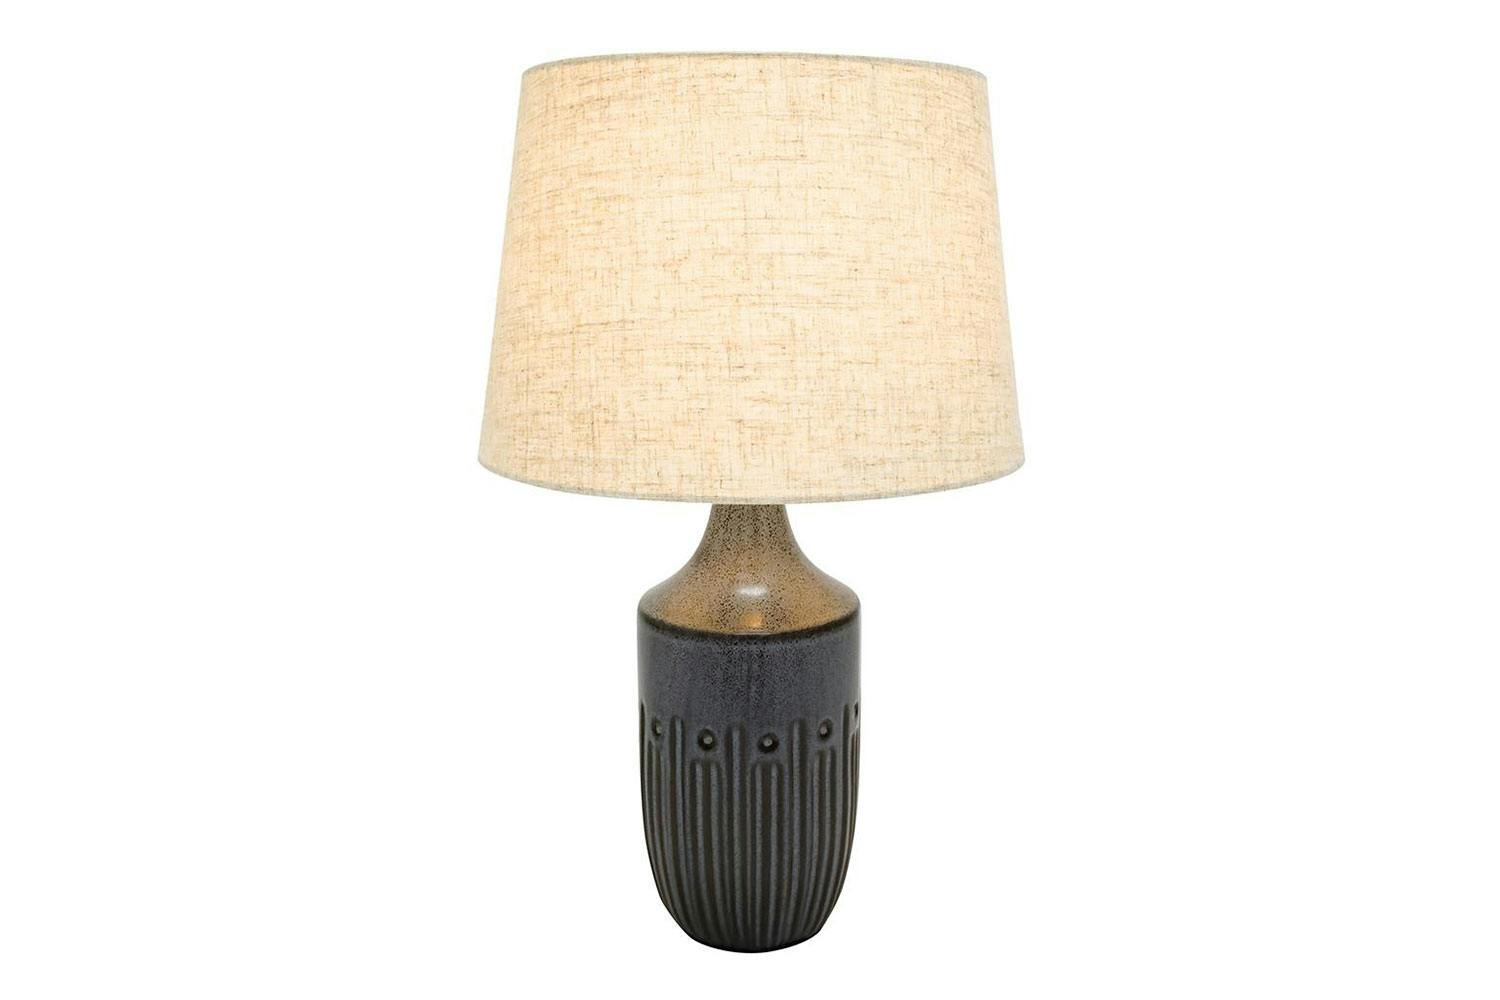 Hannon 58cm Table Lamp by Stoneleigh & Roberson - Grey